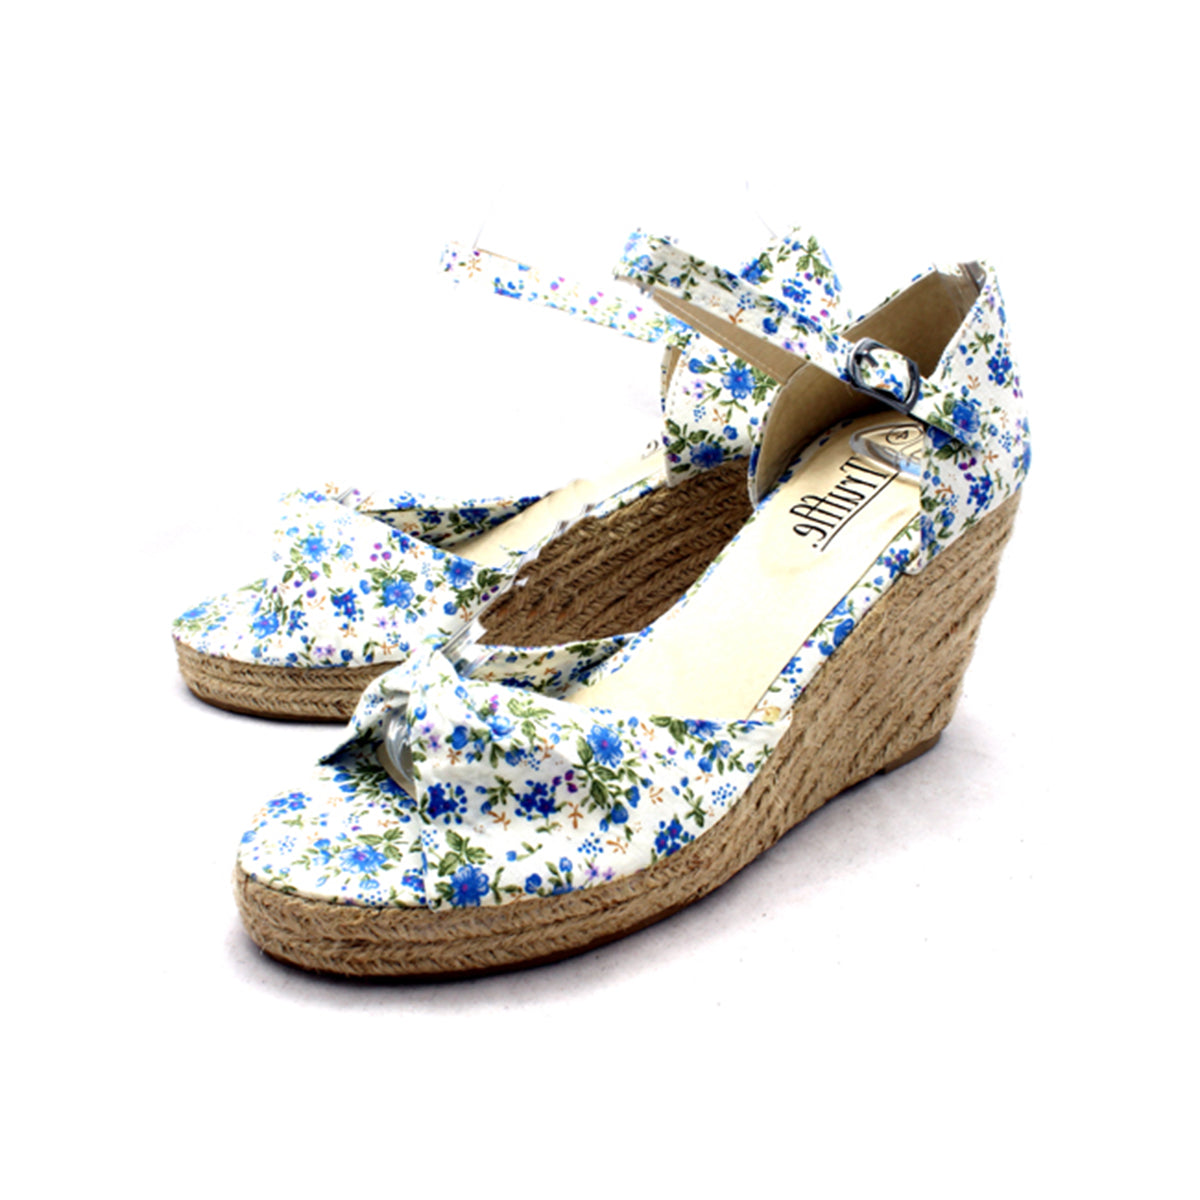 Blue floral Canvas Wedge heel sandals with peep toe and ankle strap